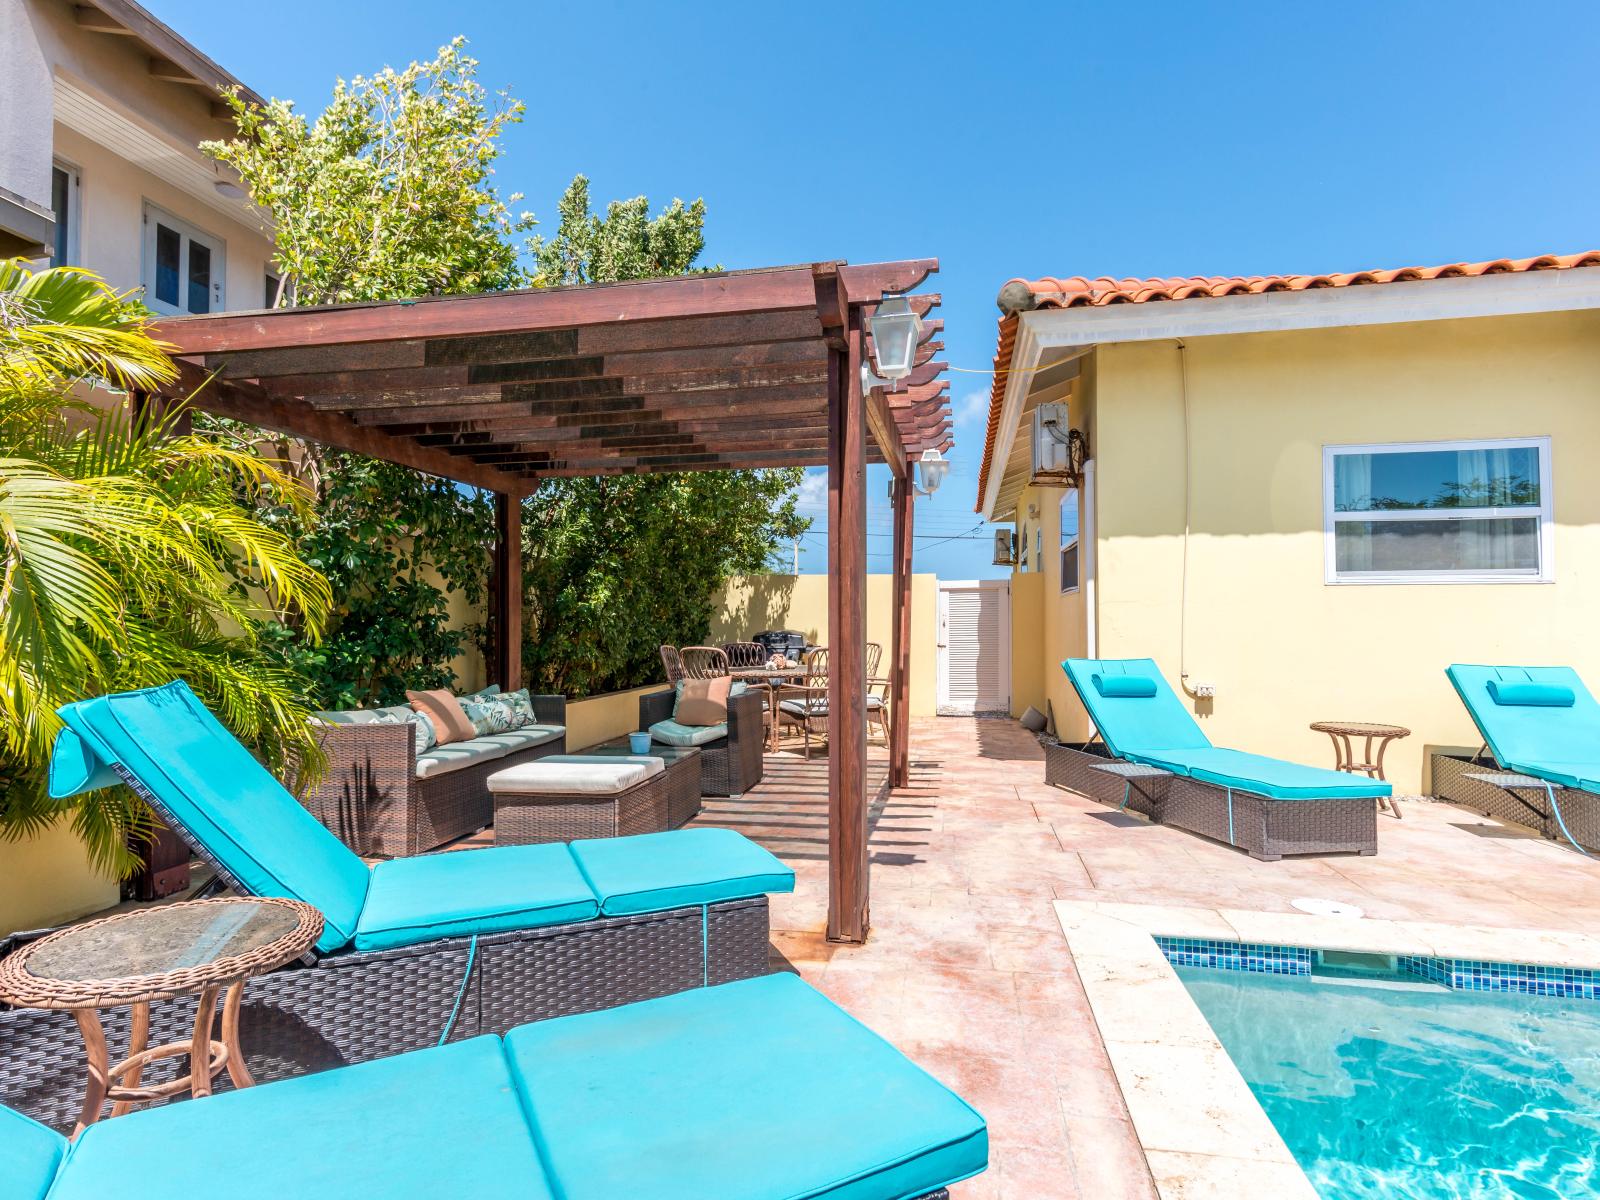 Enjoy the tranquility of the outdoors from the comfort of outdoor seating area of the home in Noord Aruba - Lots of chairs by the pool for laying in the sun with pool views - Bask in sun-kissed luxury near the water and unwind